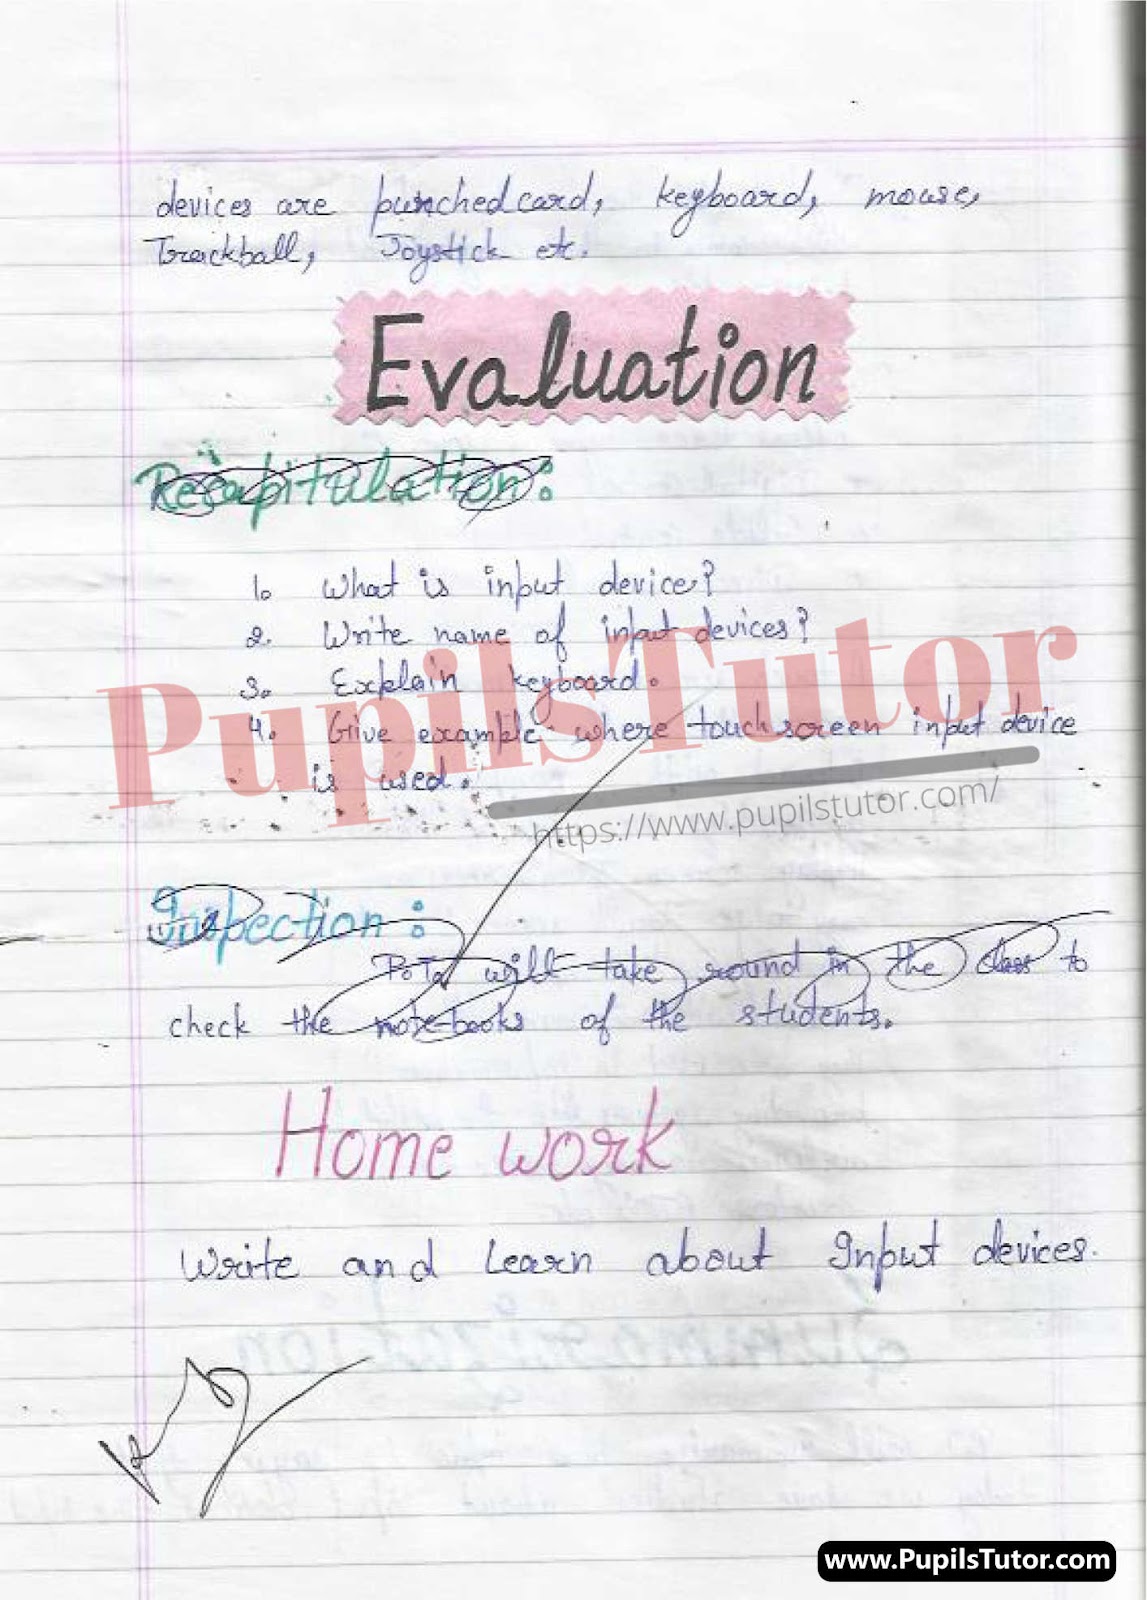 Input Devices Lesson Plan For B.Ed 1st Year, 2nd Year And All Semesters Students – [Page 6] – pupilstutor.com